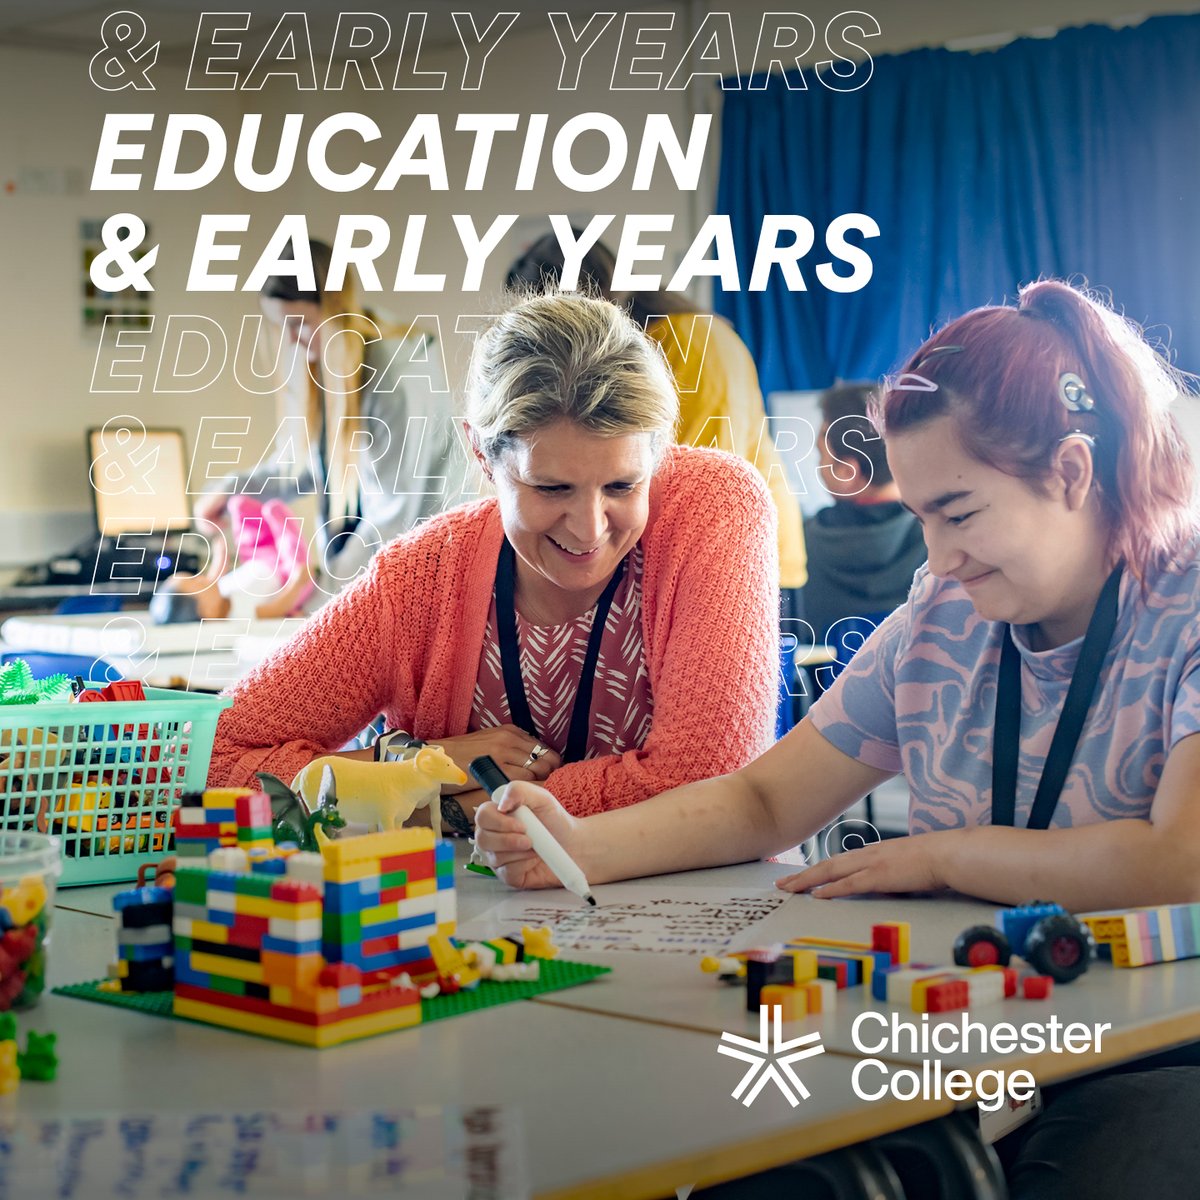 Do you dream of working with children and young people? If you want a career that really impacts people's lives our #TLevel in Early Years & Education could be perfect for you. Click the link for more info: orlo.uk/3F6YE #MadeAtChiCollege